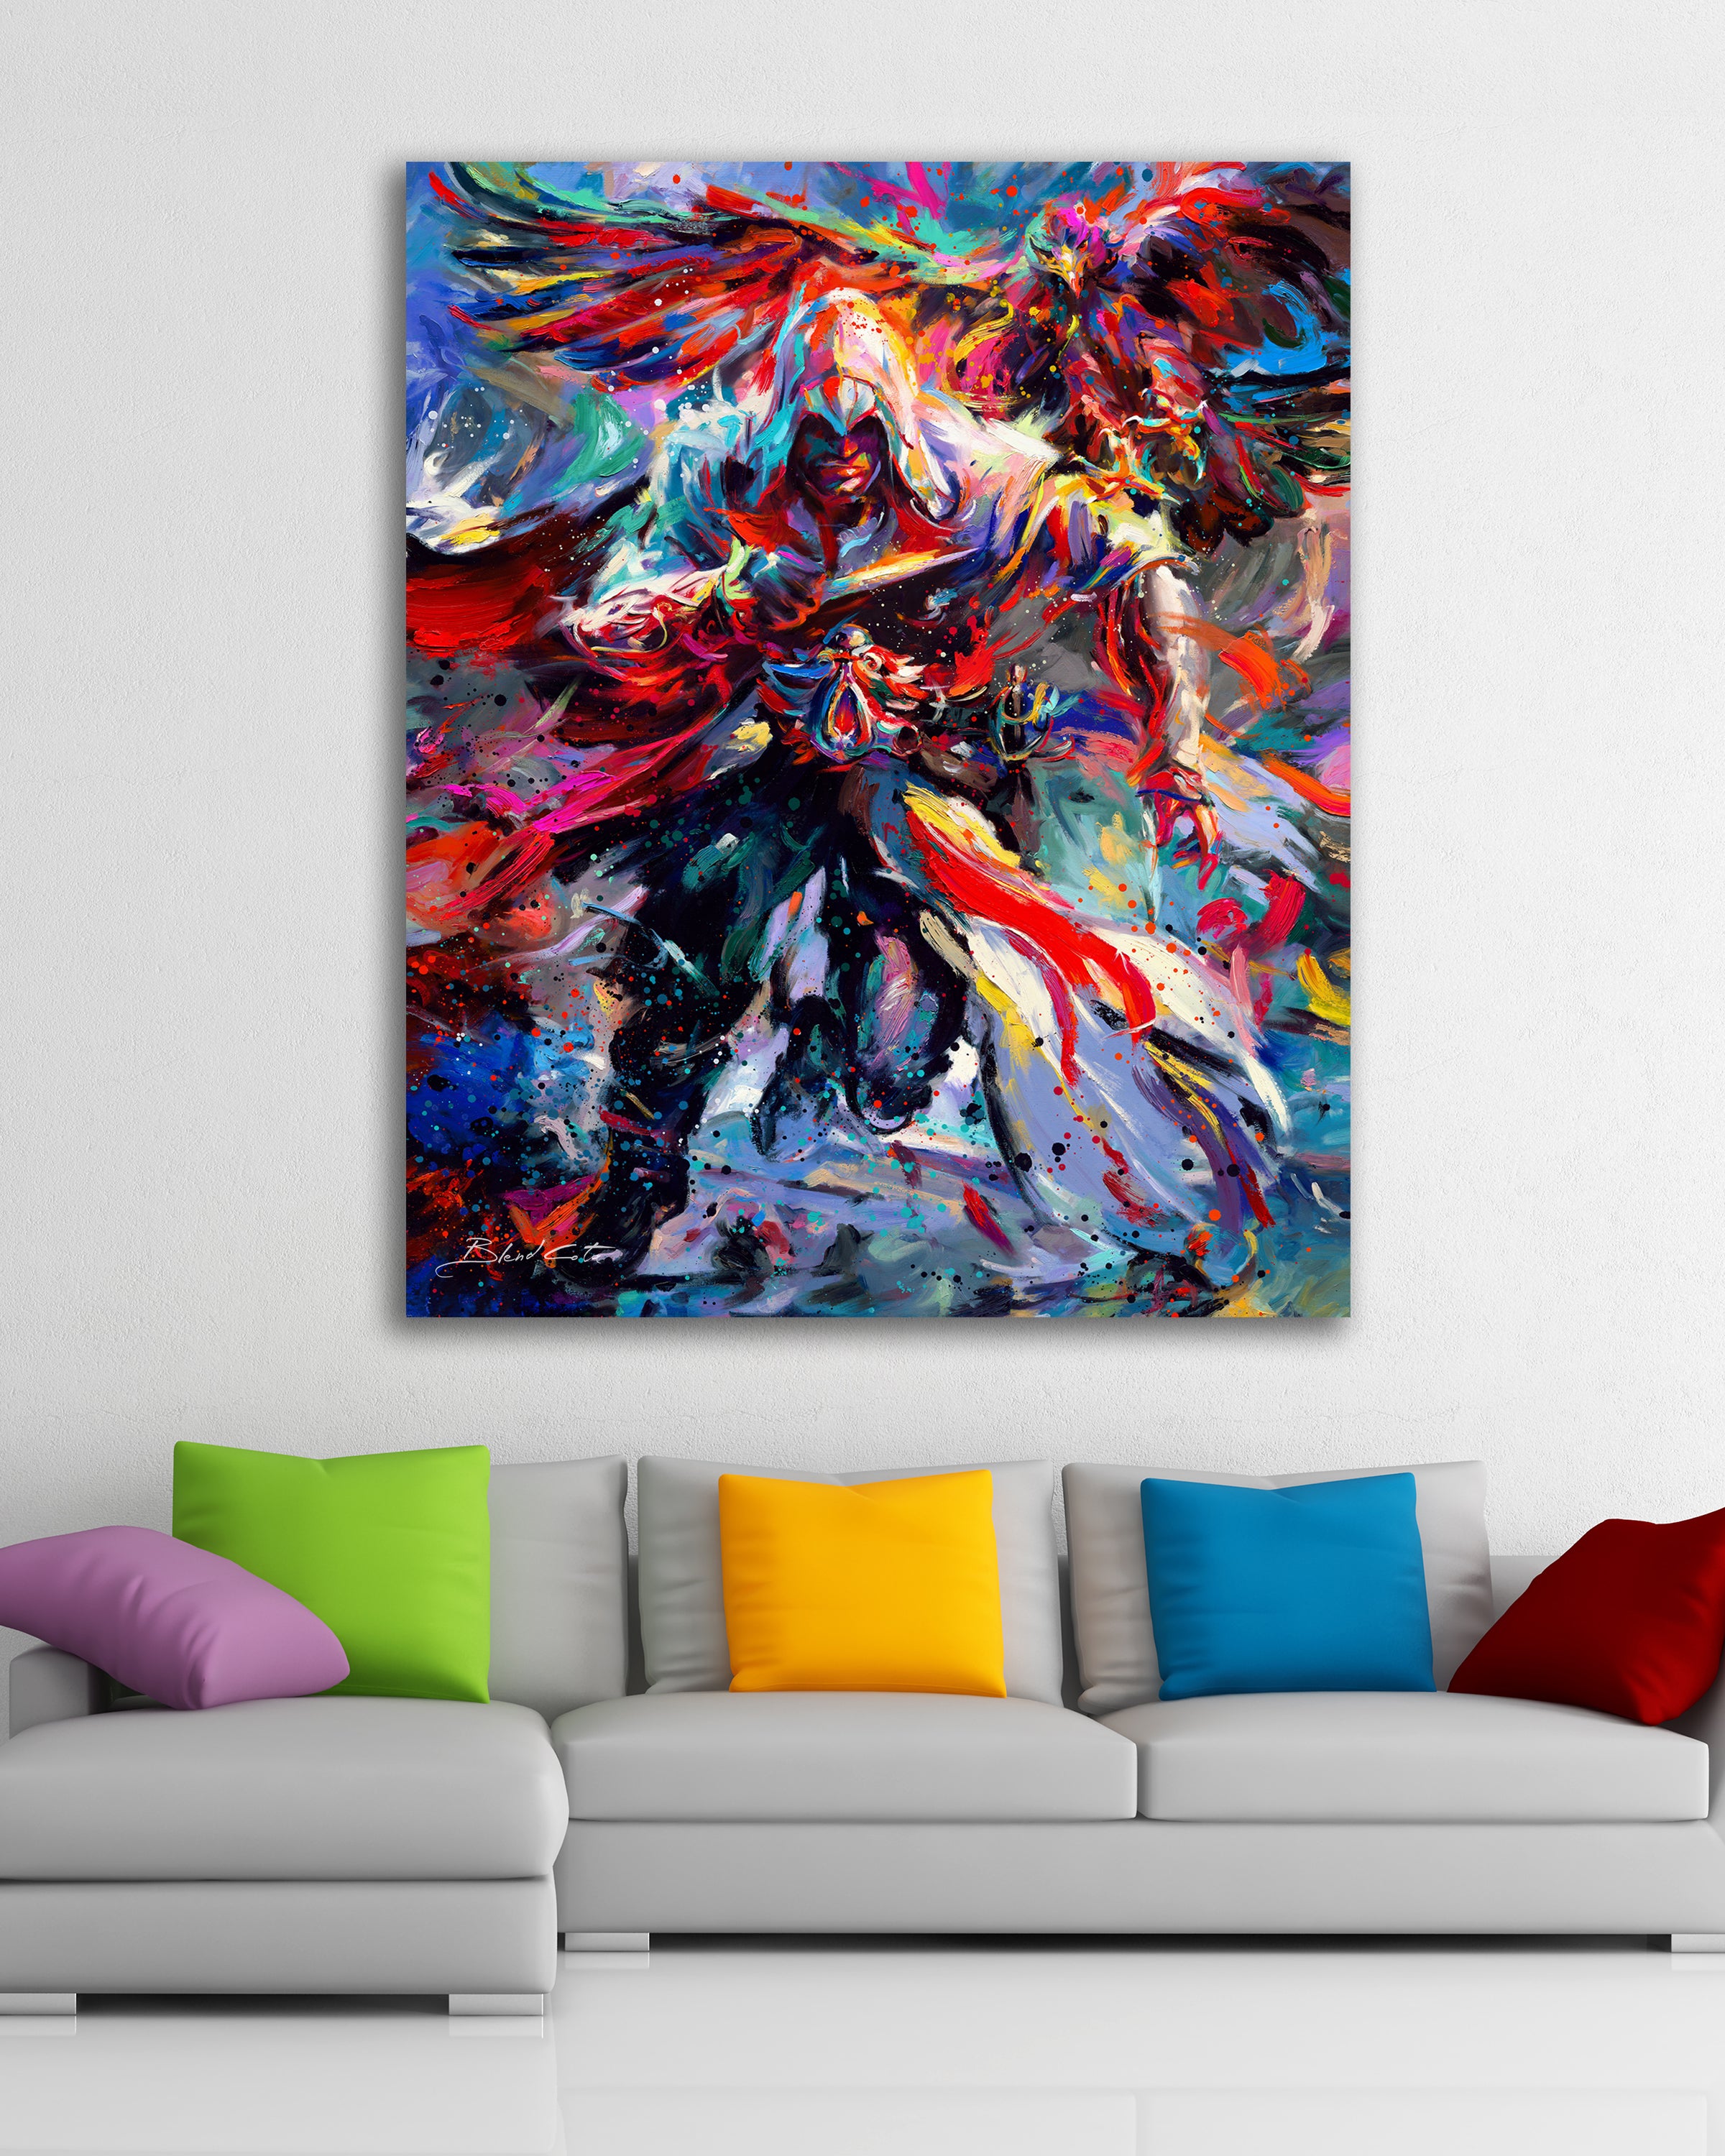 Oil on canvas original painting of Assassin's Creed Ezio Auditore and Eagle bursting forth with energy and painted with colorful brushstrokes in an expressionistic style in a room setting.